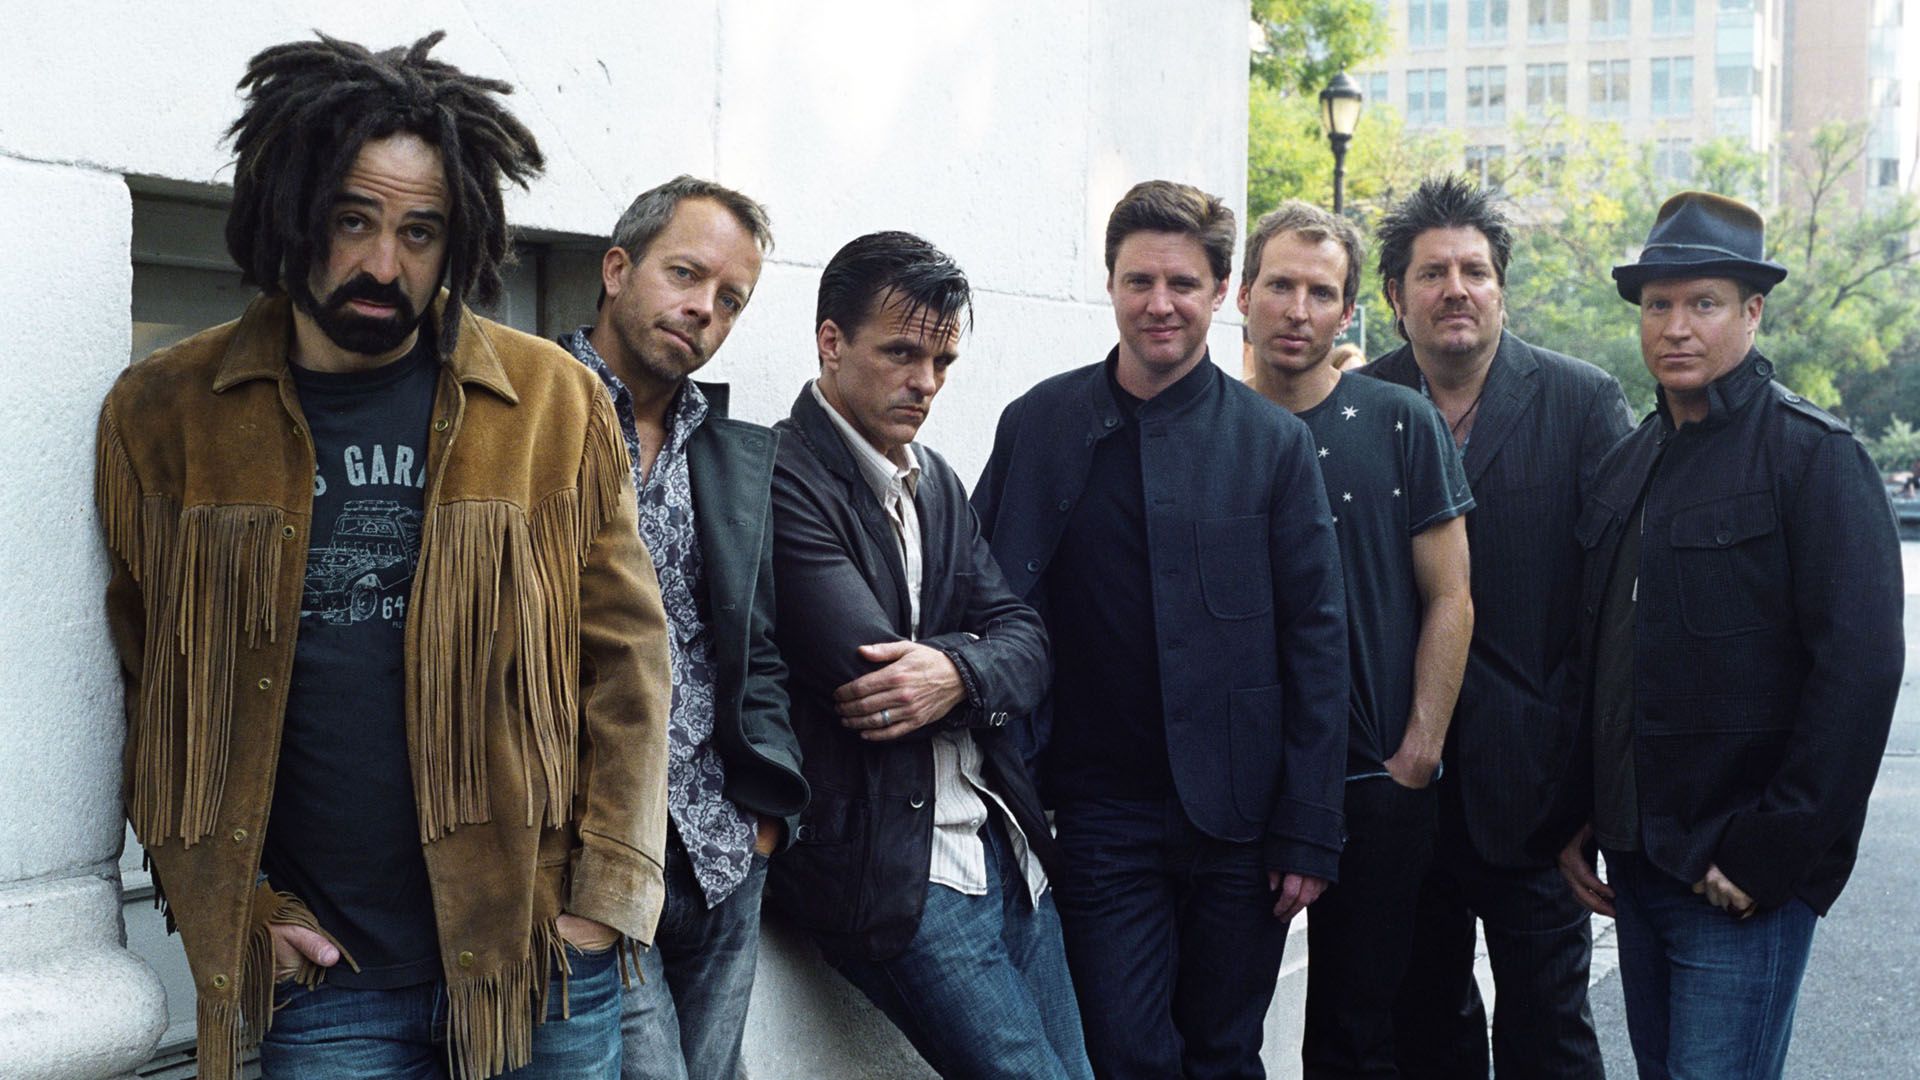 Counting Crows Wallpapers